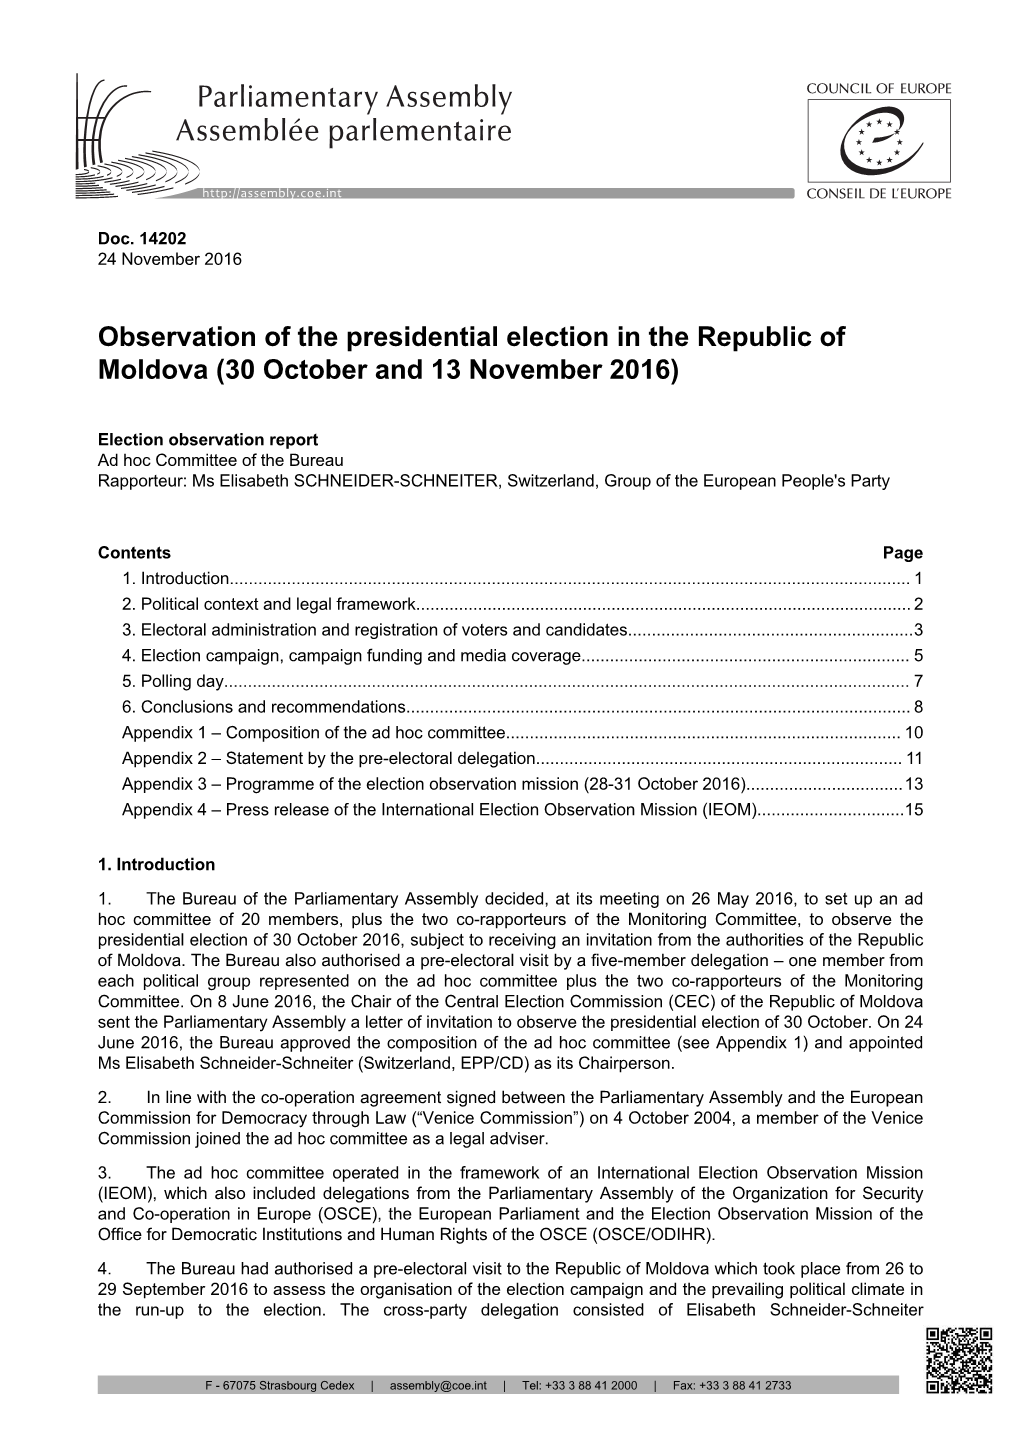 Observation of the Presidential Election in the Republic of Moldova (30 October and 13 November 2016)